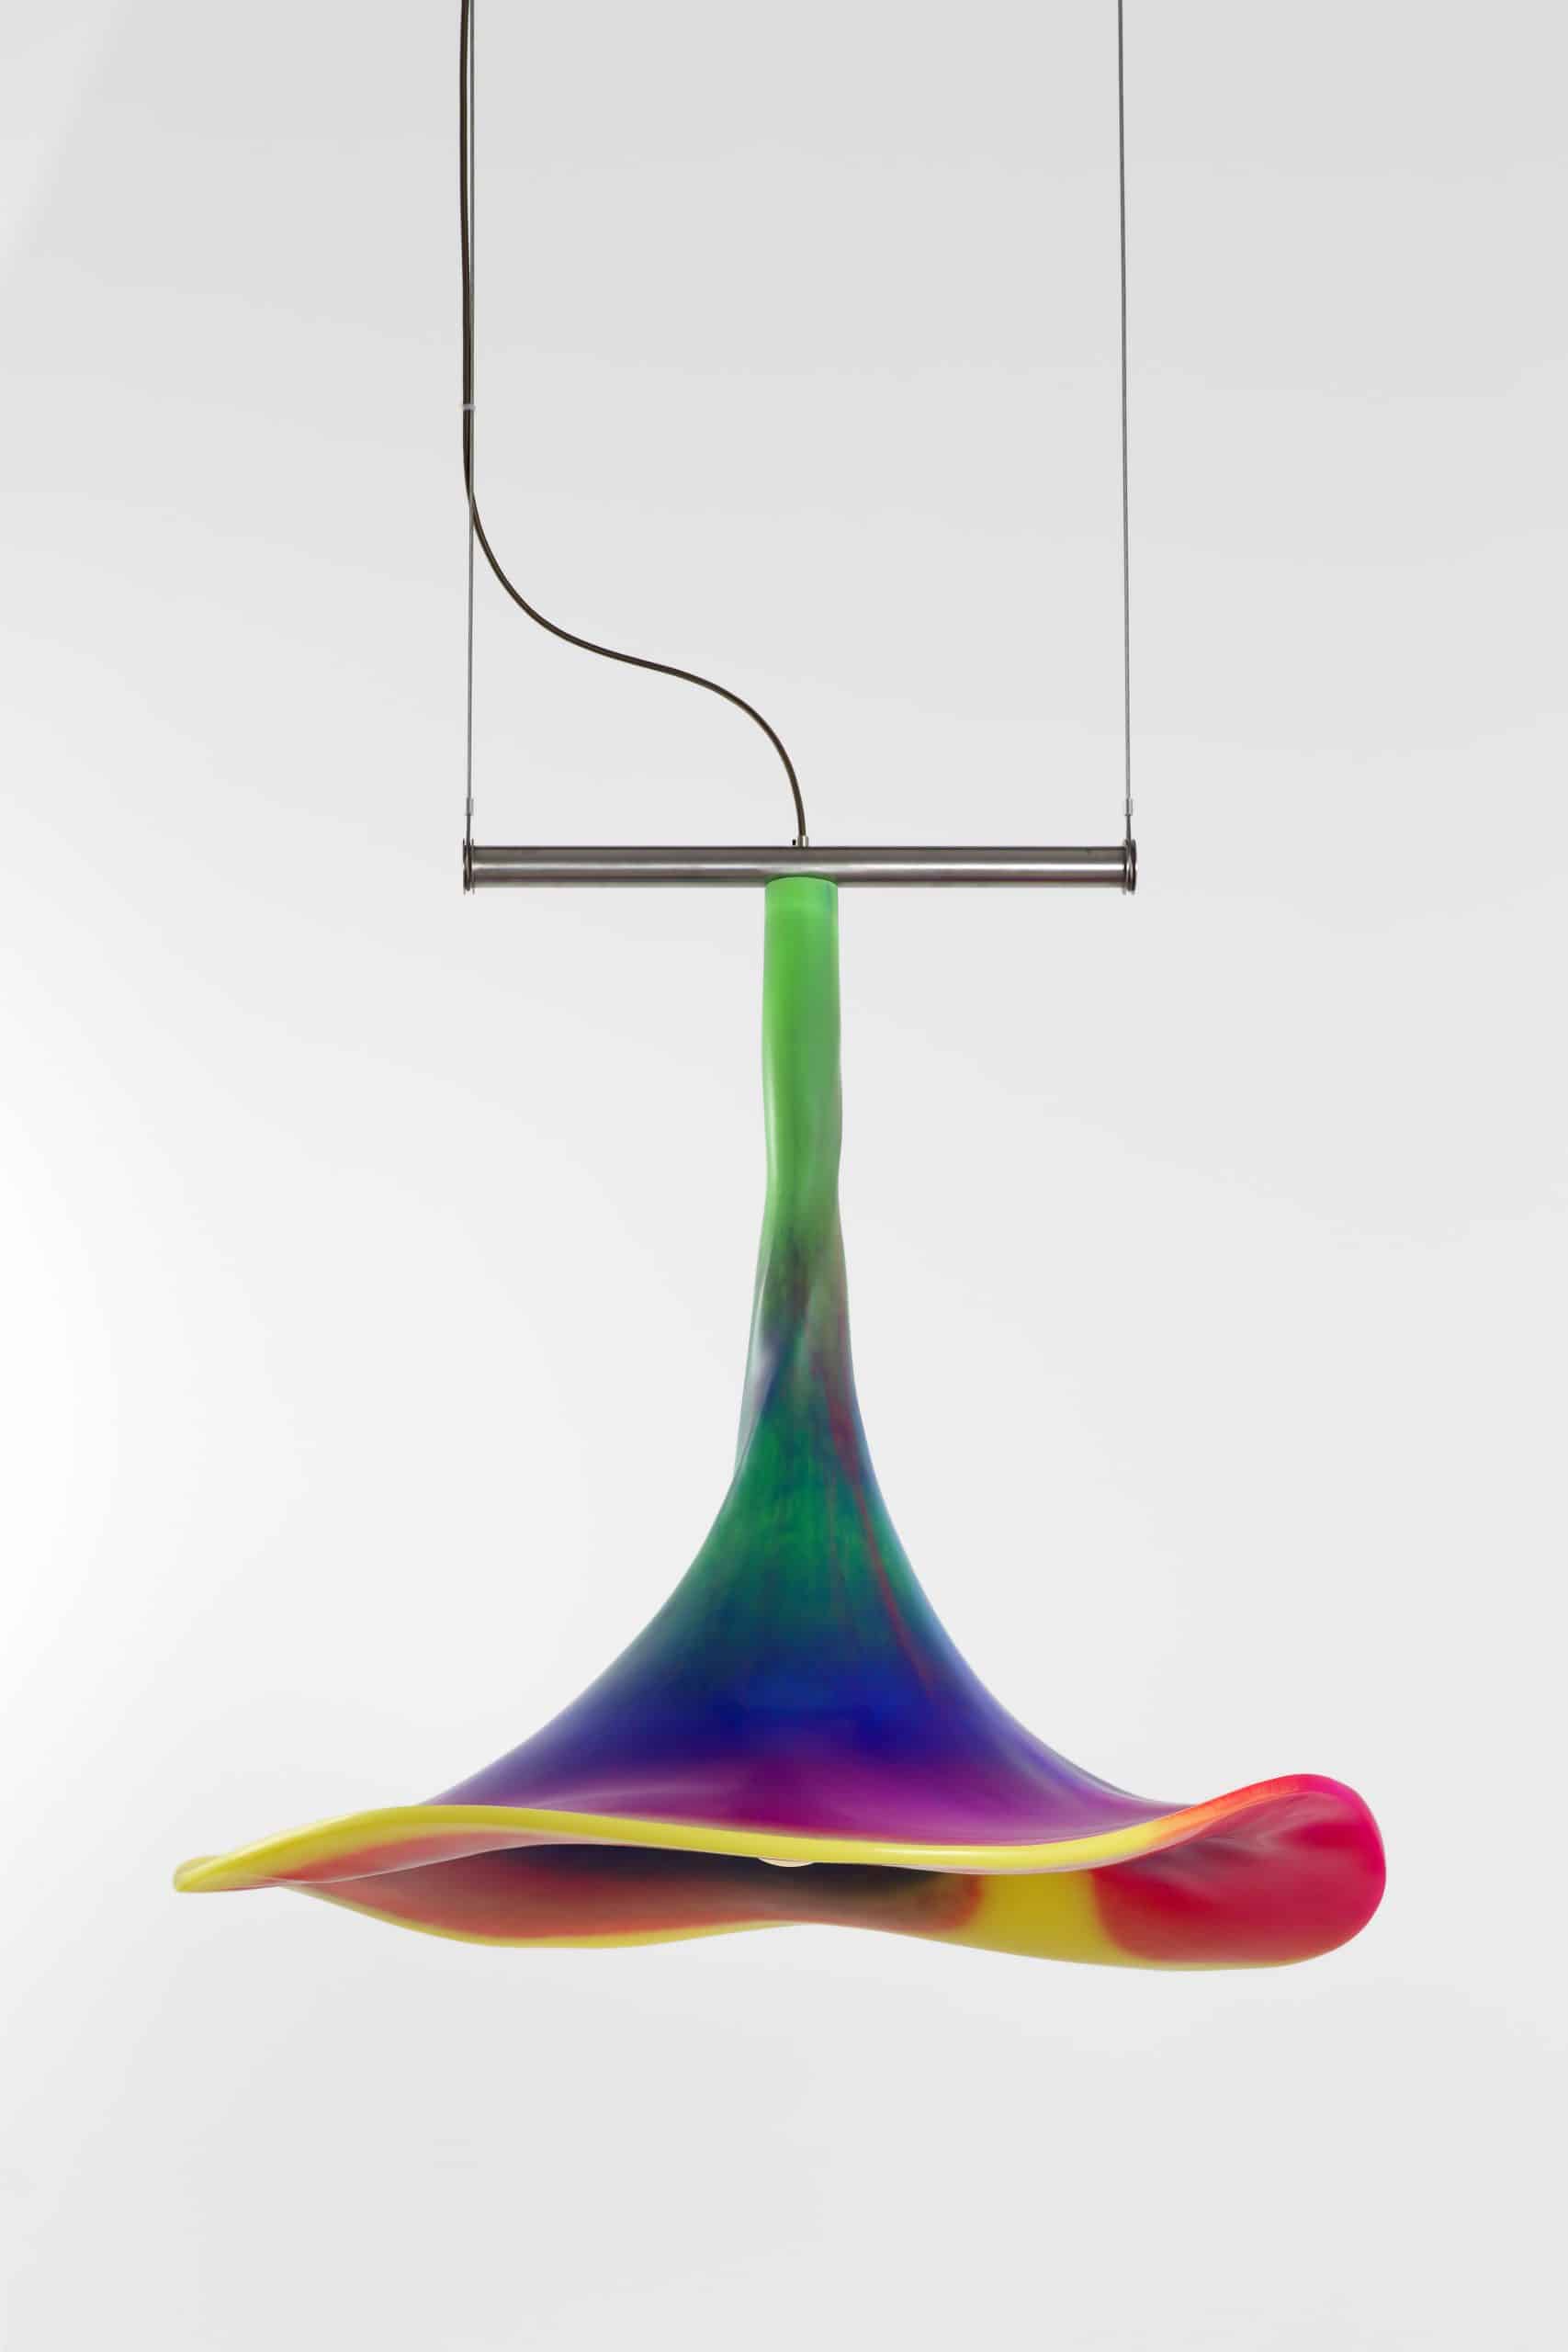 Chandelier by Paula Hayes with a rainbow-colored trumpet-shaped shade